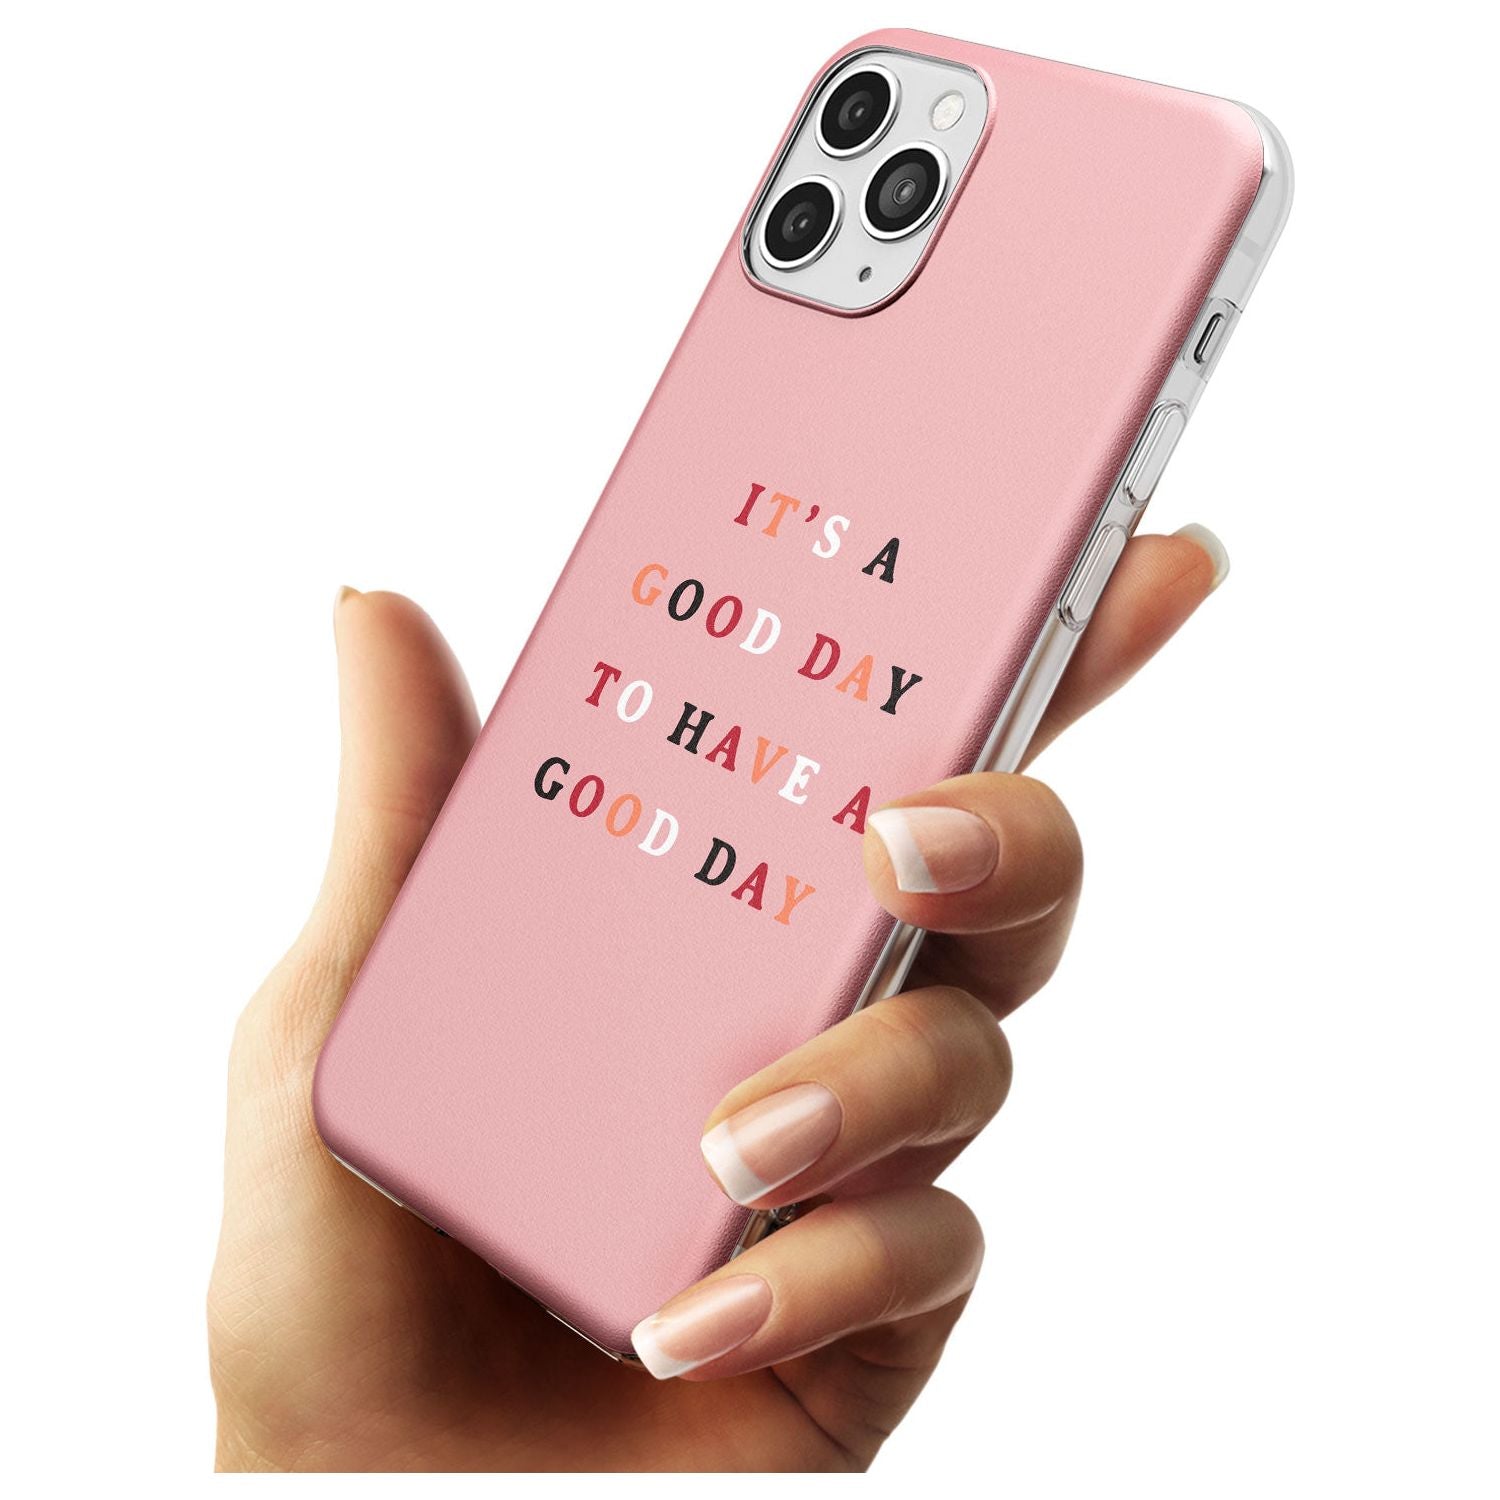 It's a good day to have a good day Slim TPU Phone Case for iPhone 11 Pro Max